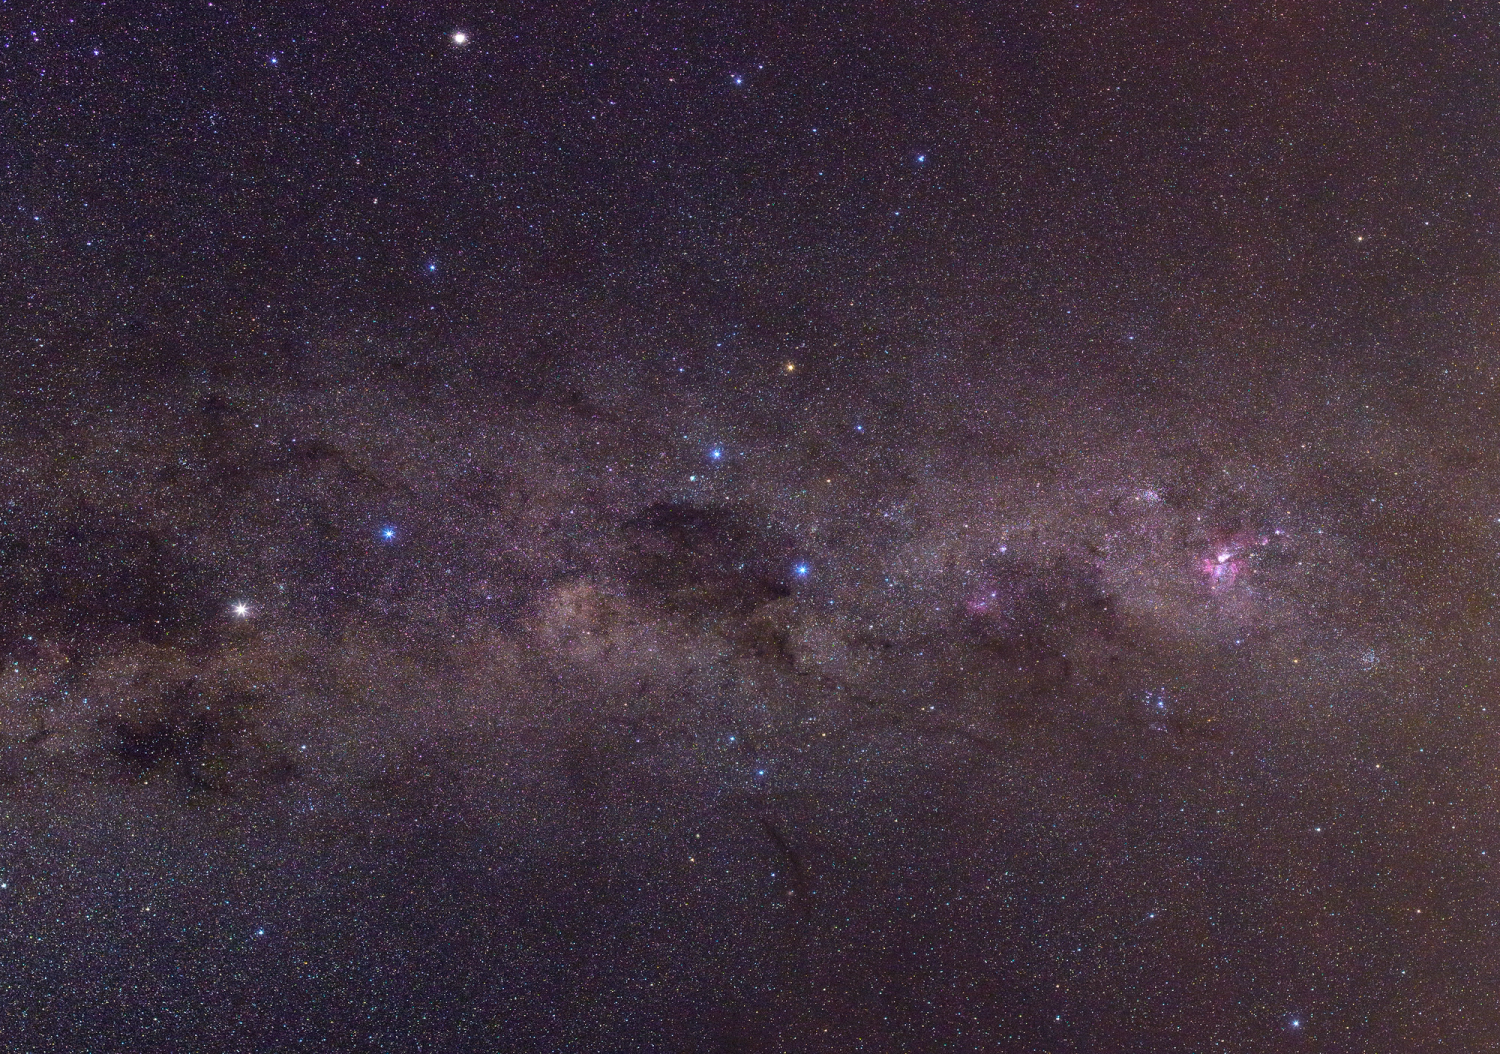 Colour photograph of the constellation of the Southern Cross and the Pointers, amongst a dense field of background stars that are blue, white and red. There are pink-ish regions (nebulae) and dark patches (interstellar dust clouds) visible too.